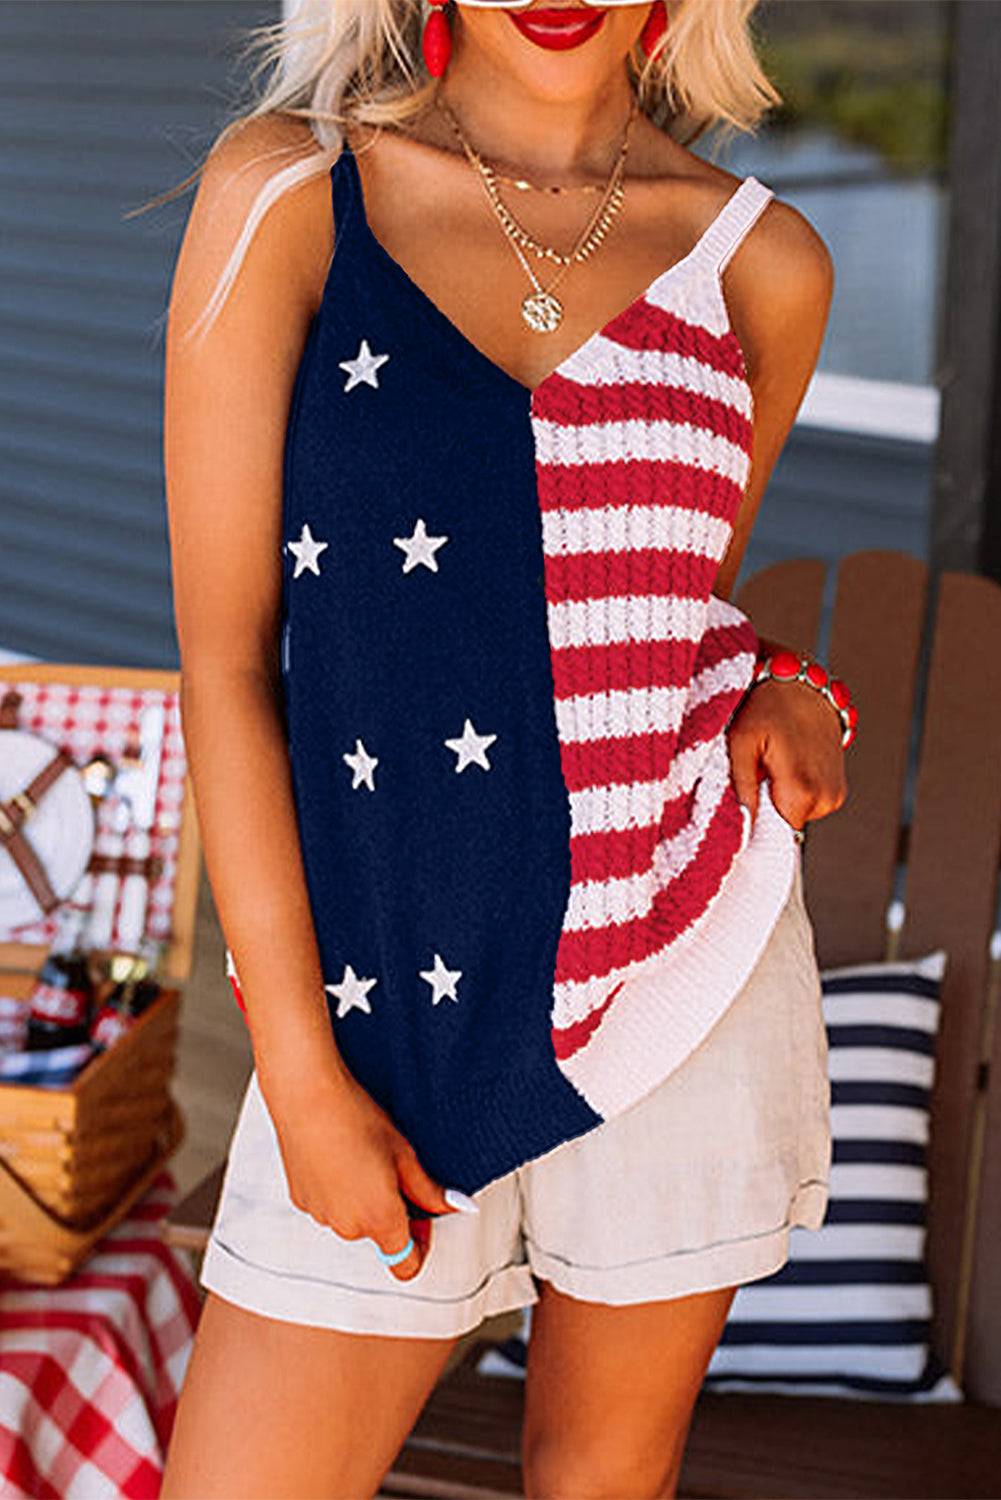 a woman wearing a patriotic top and shorts